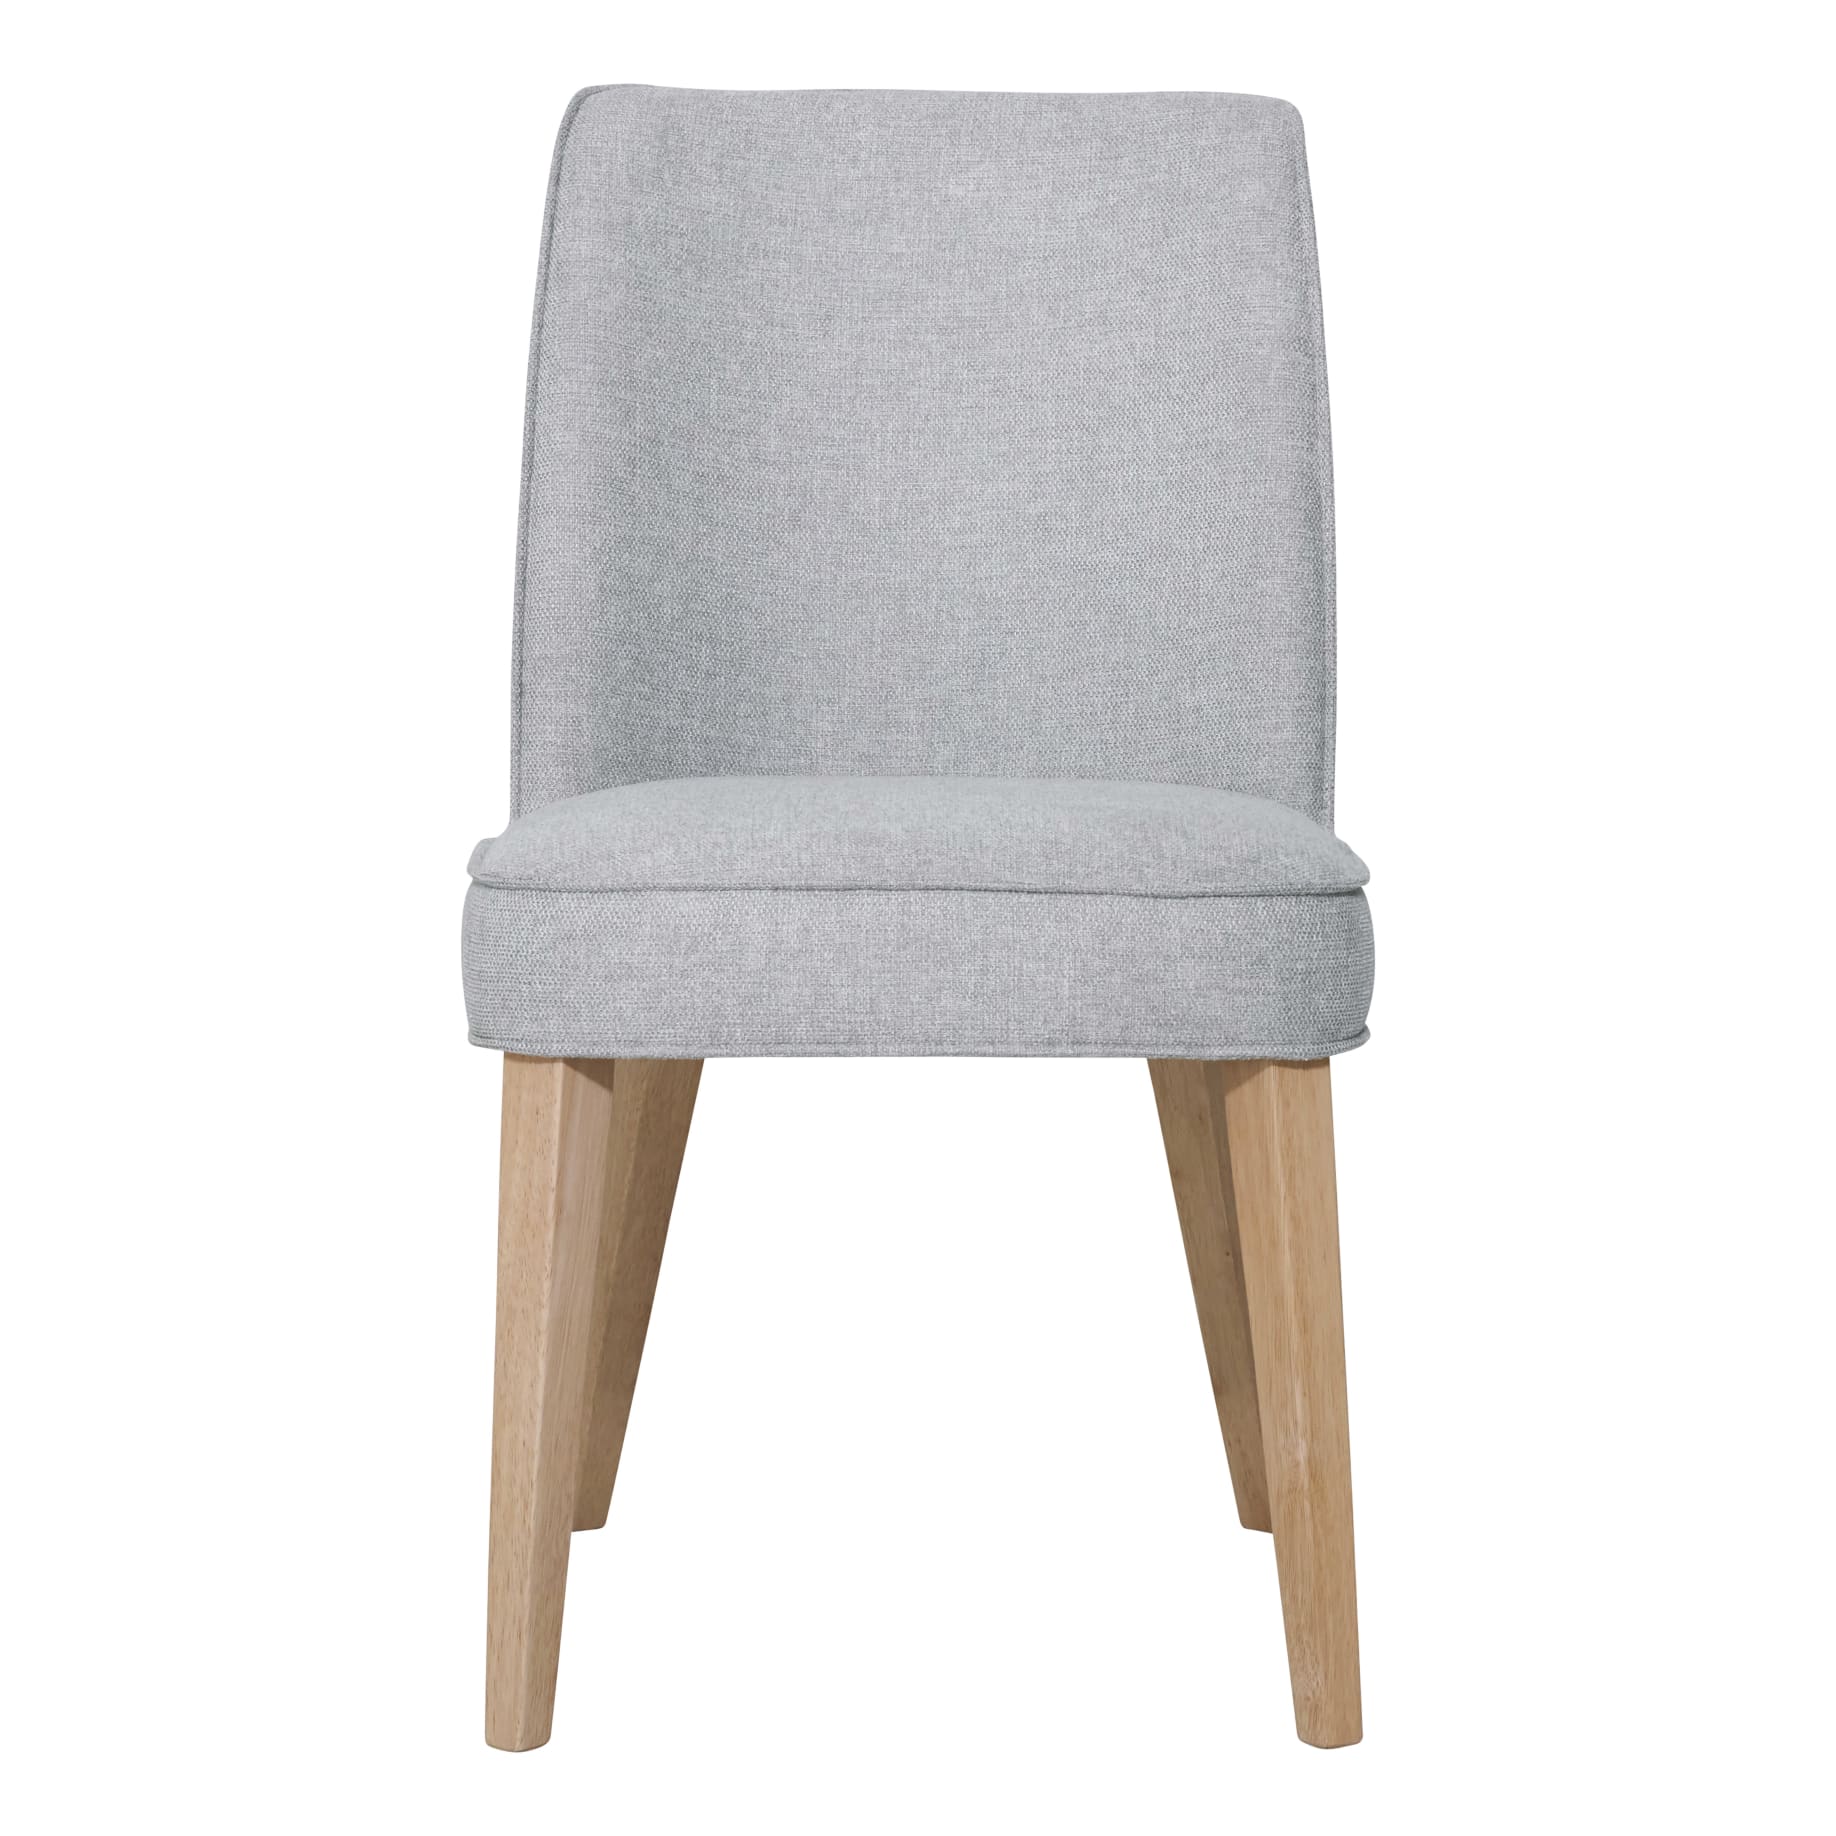 Hogan Dining Chair in Belfast Grey / Clear Lacquer